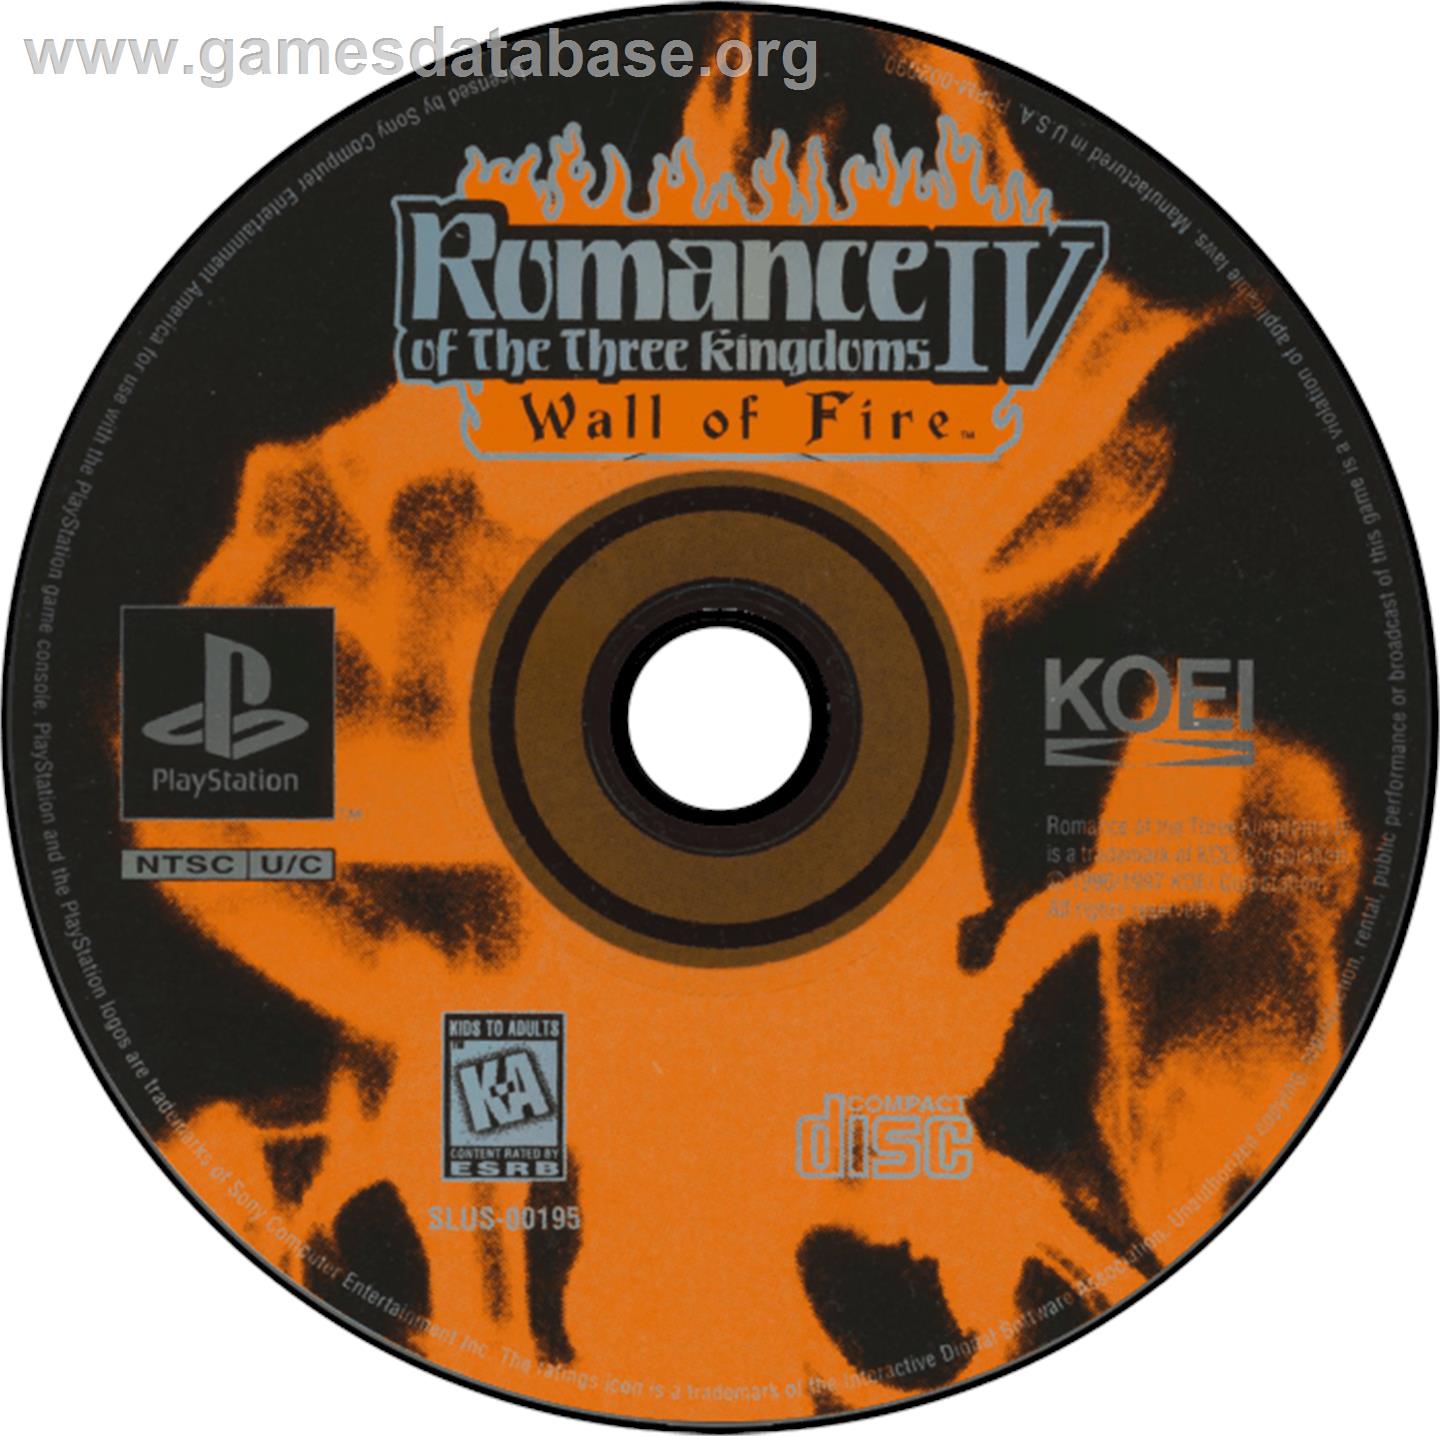 Romance of the Three Kingdoms IV: Wall of Fire - Sony Playstation - Artwork - Disc